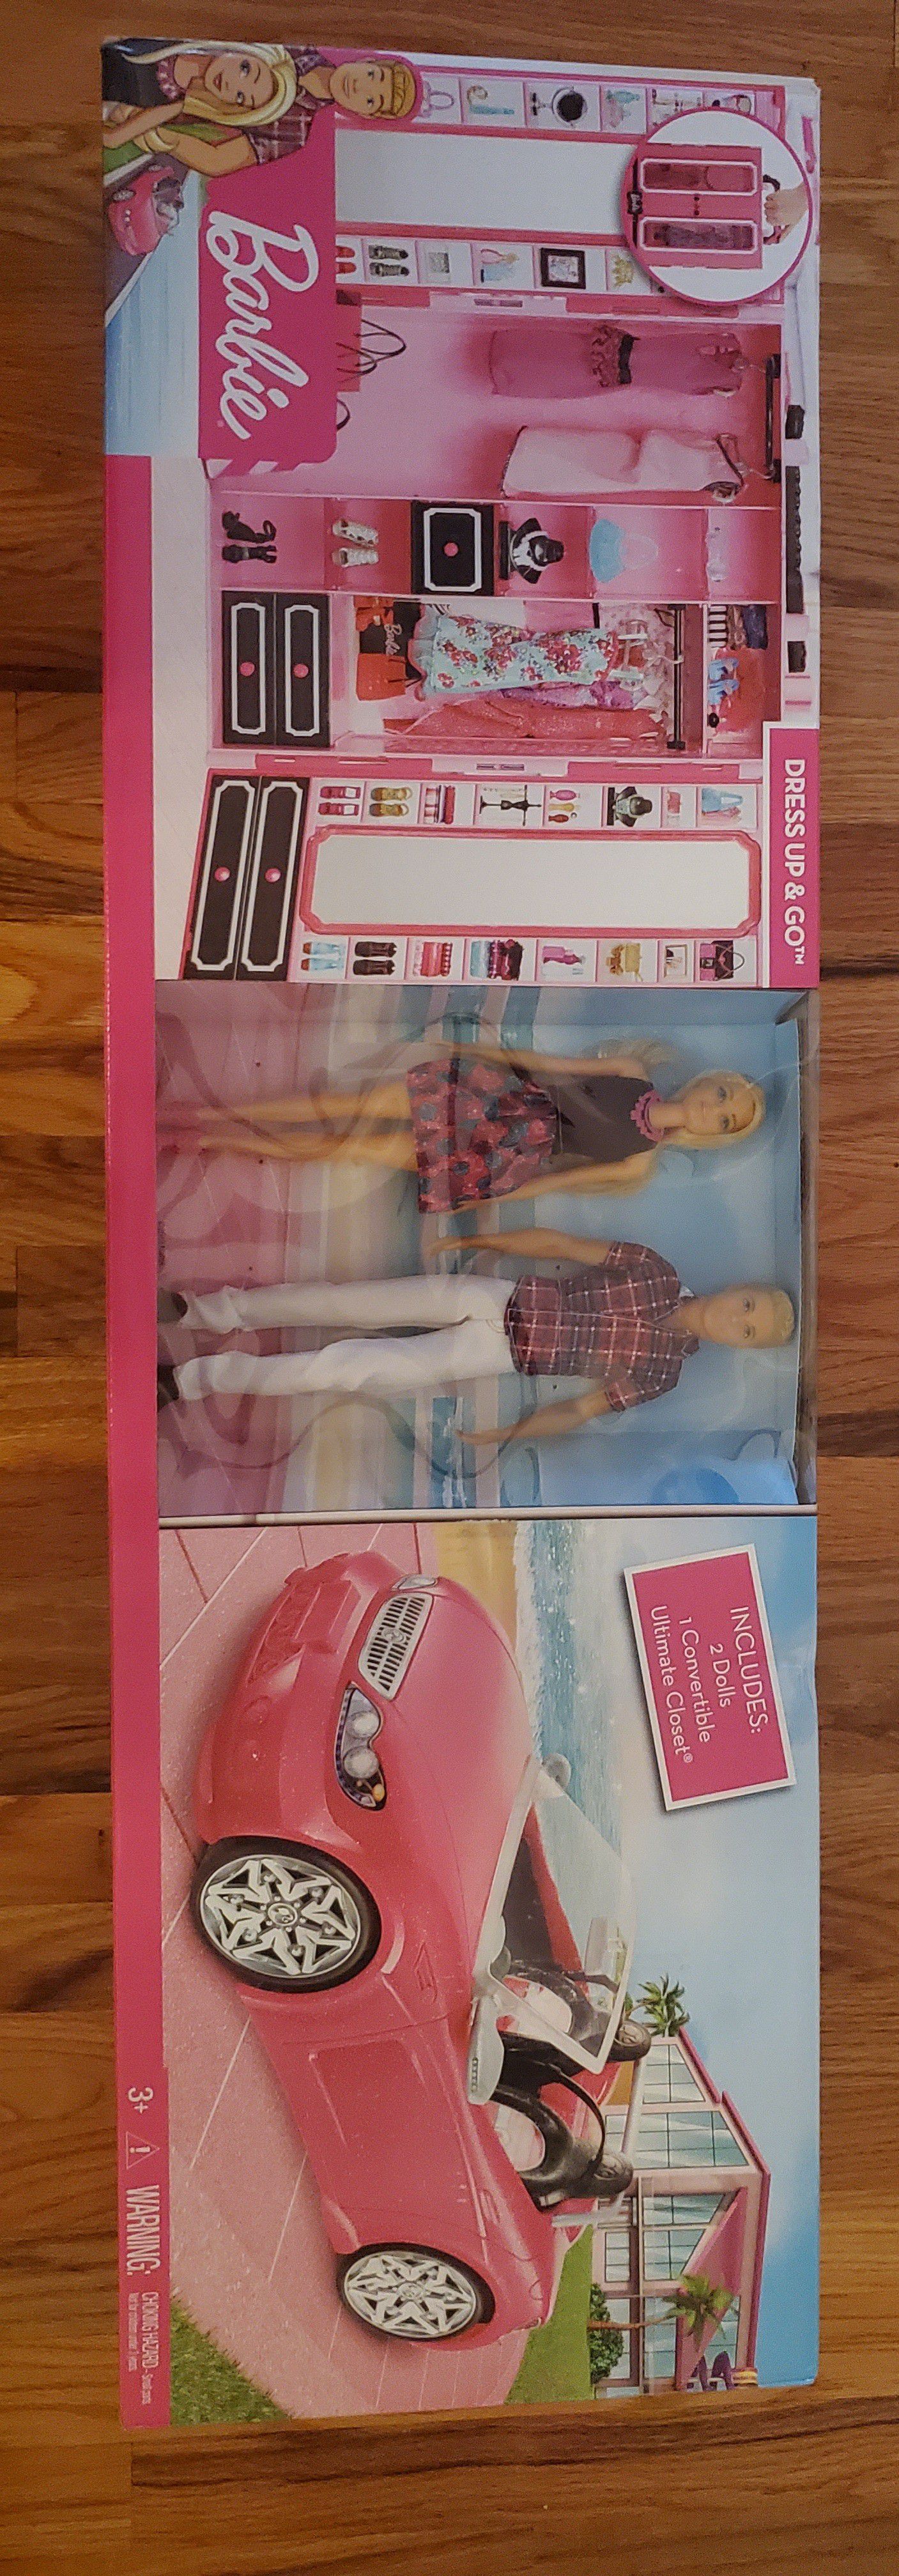 Barbie Dress Up and Go Includes Ultimate Closet, Glam Convertible and Barbie Ken Dolls Big Box Set